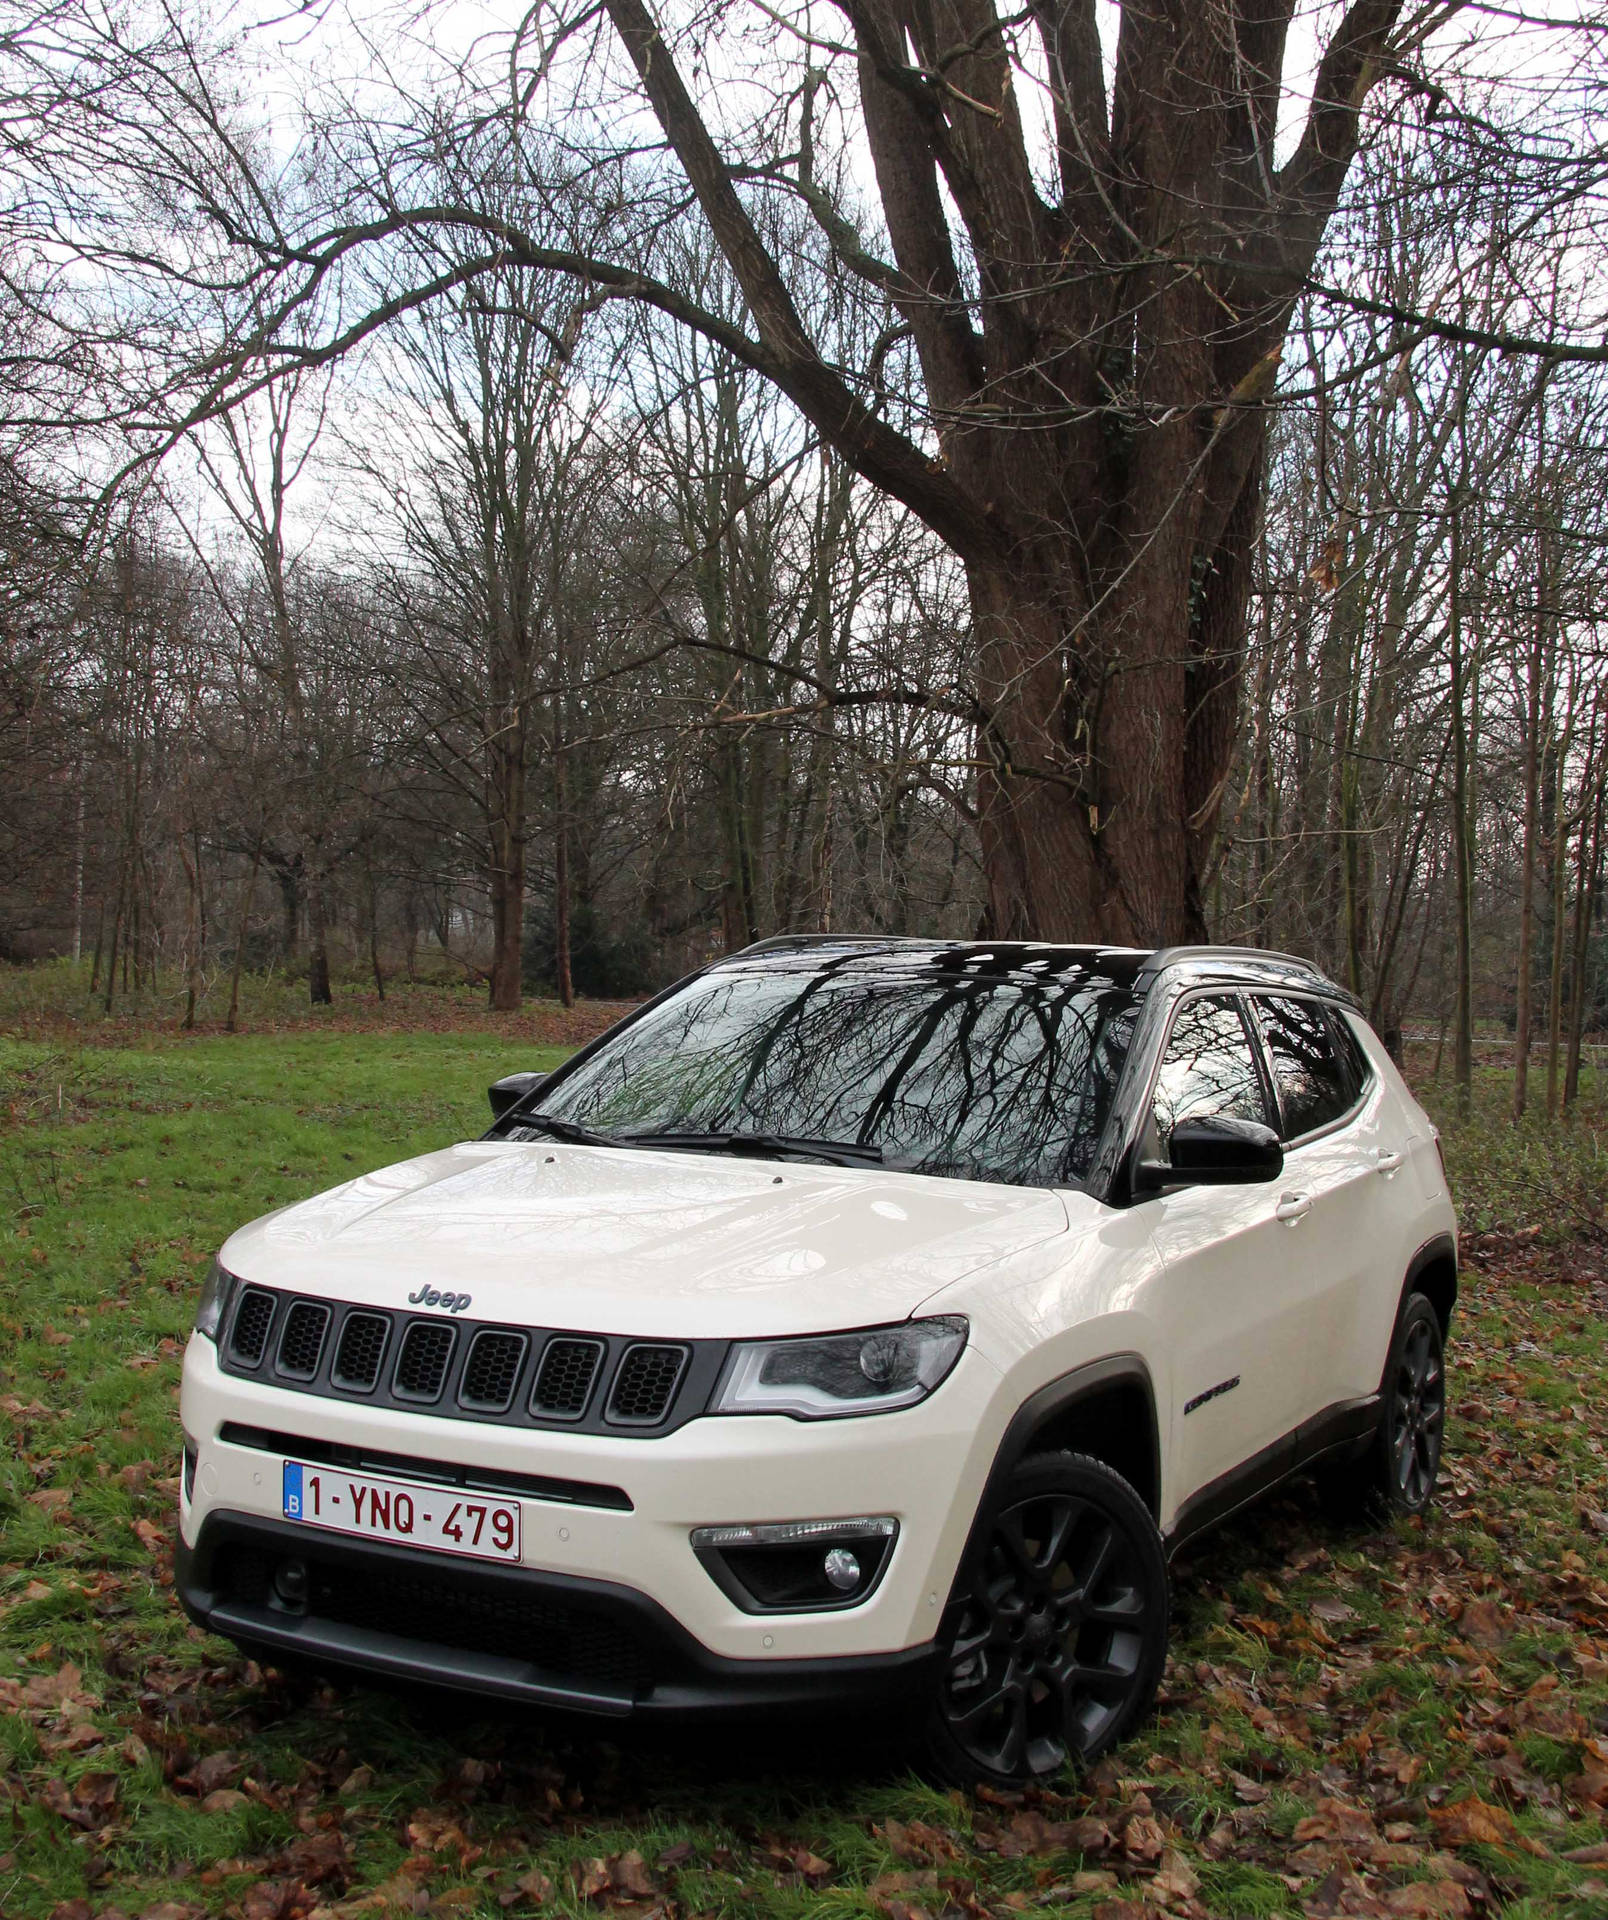 Jeep Compass White Aesthetic By Tree Wallpaper